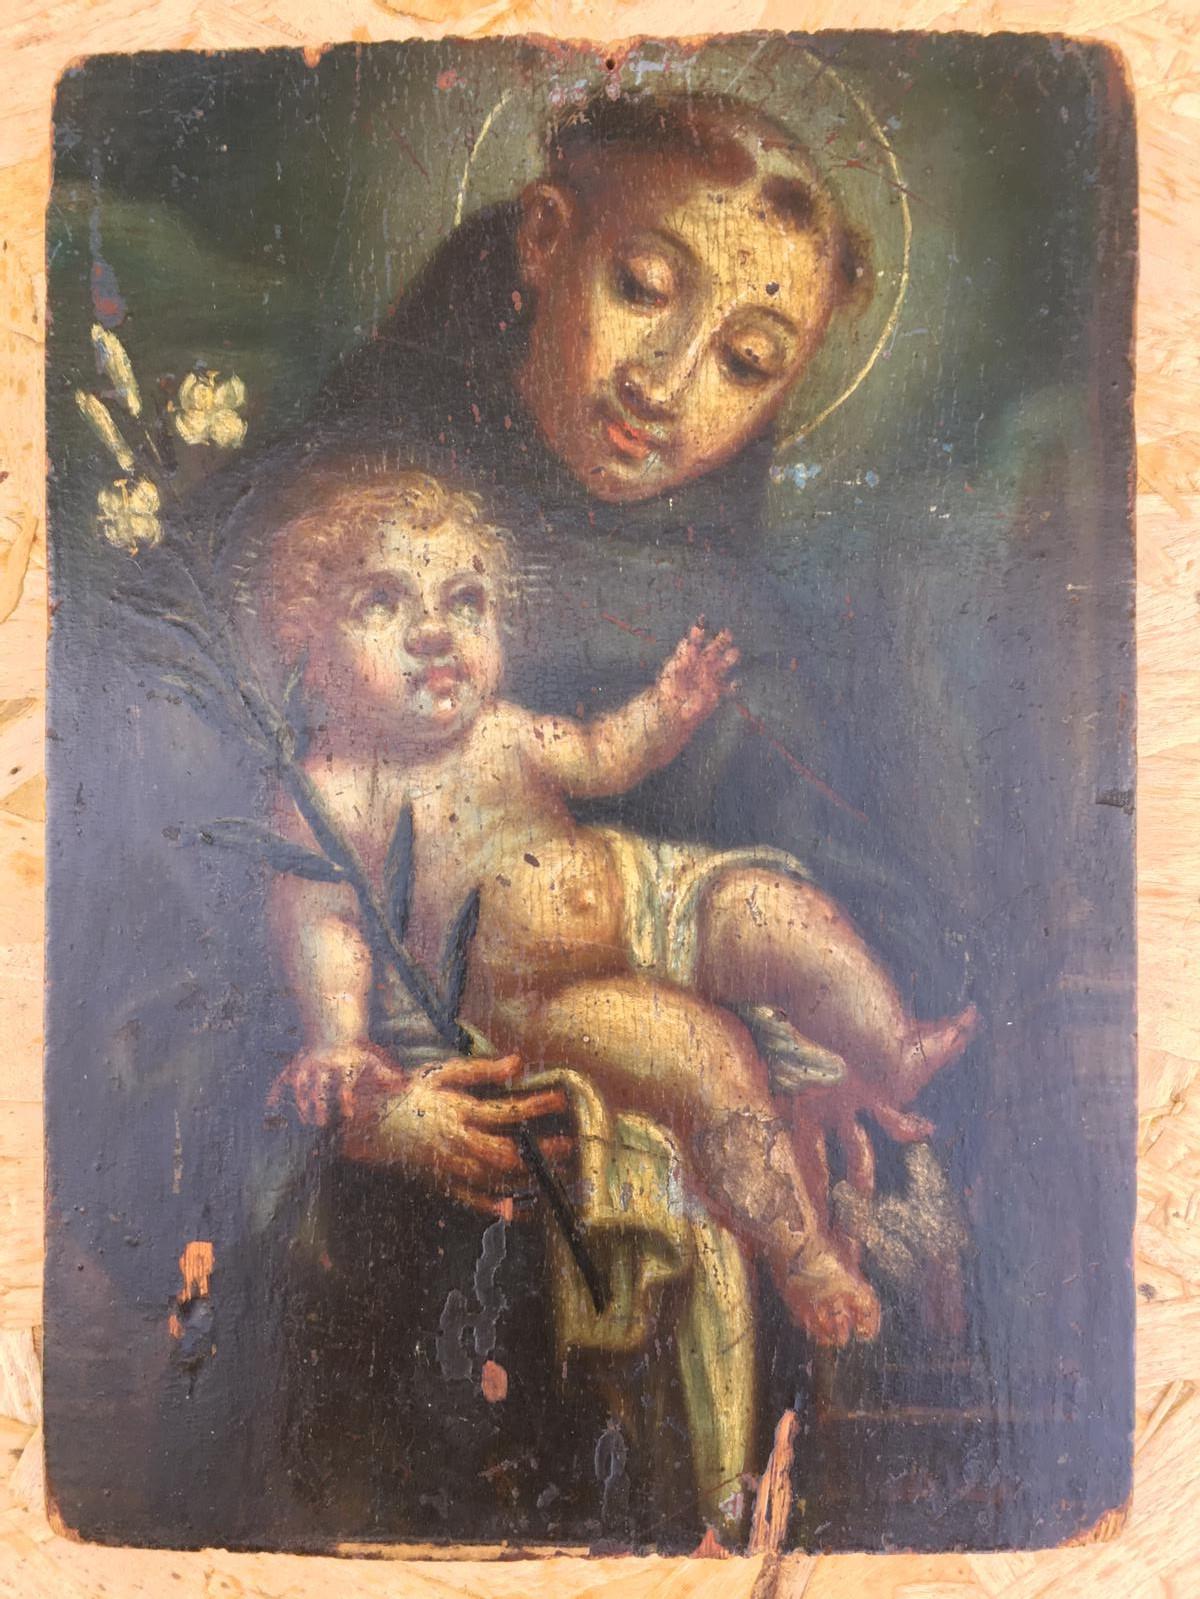 Original oil on panel of Saint offering the Child, by an unidentified artist.

--This painting represents St. Anthony of Padua. The scene is one that is often chosen to represent him: his fellow Franciscans looked out the window one day and saw a